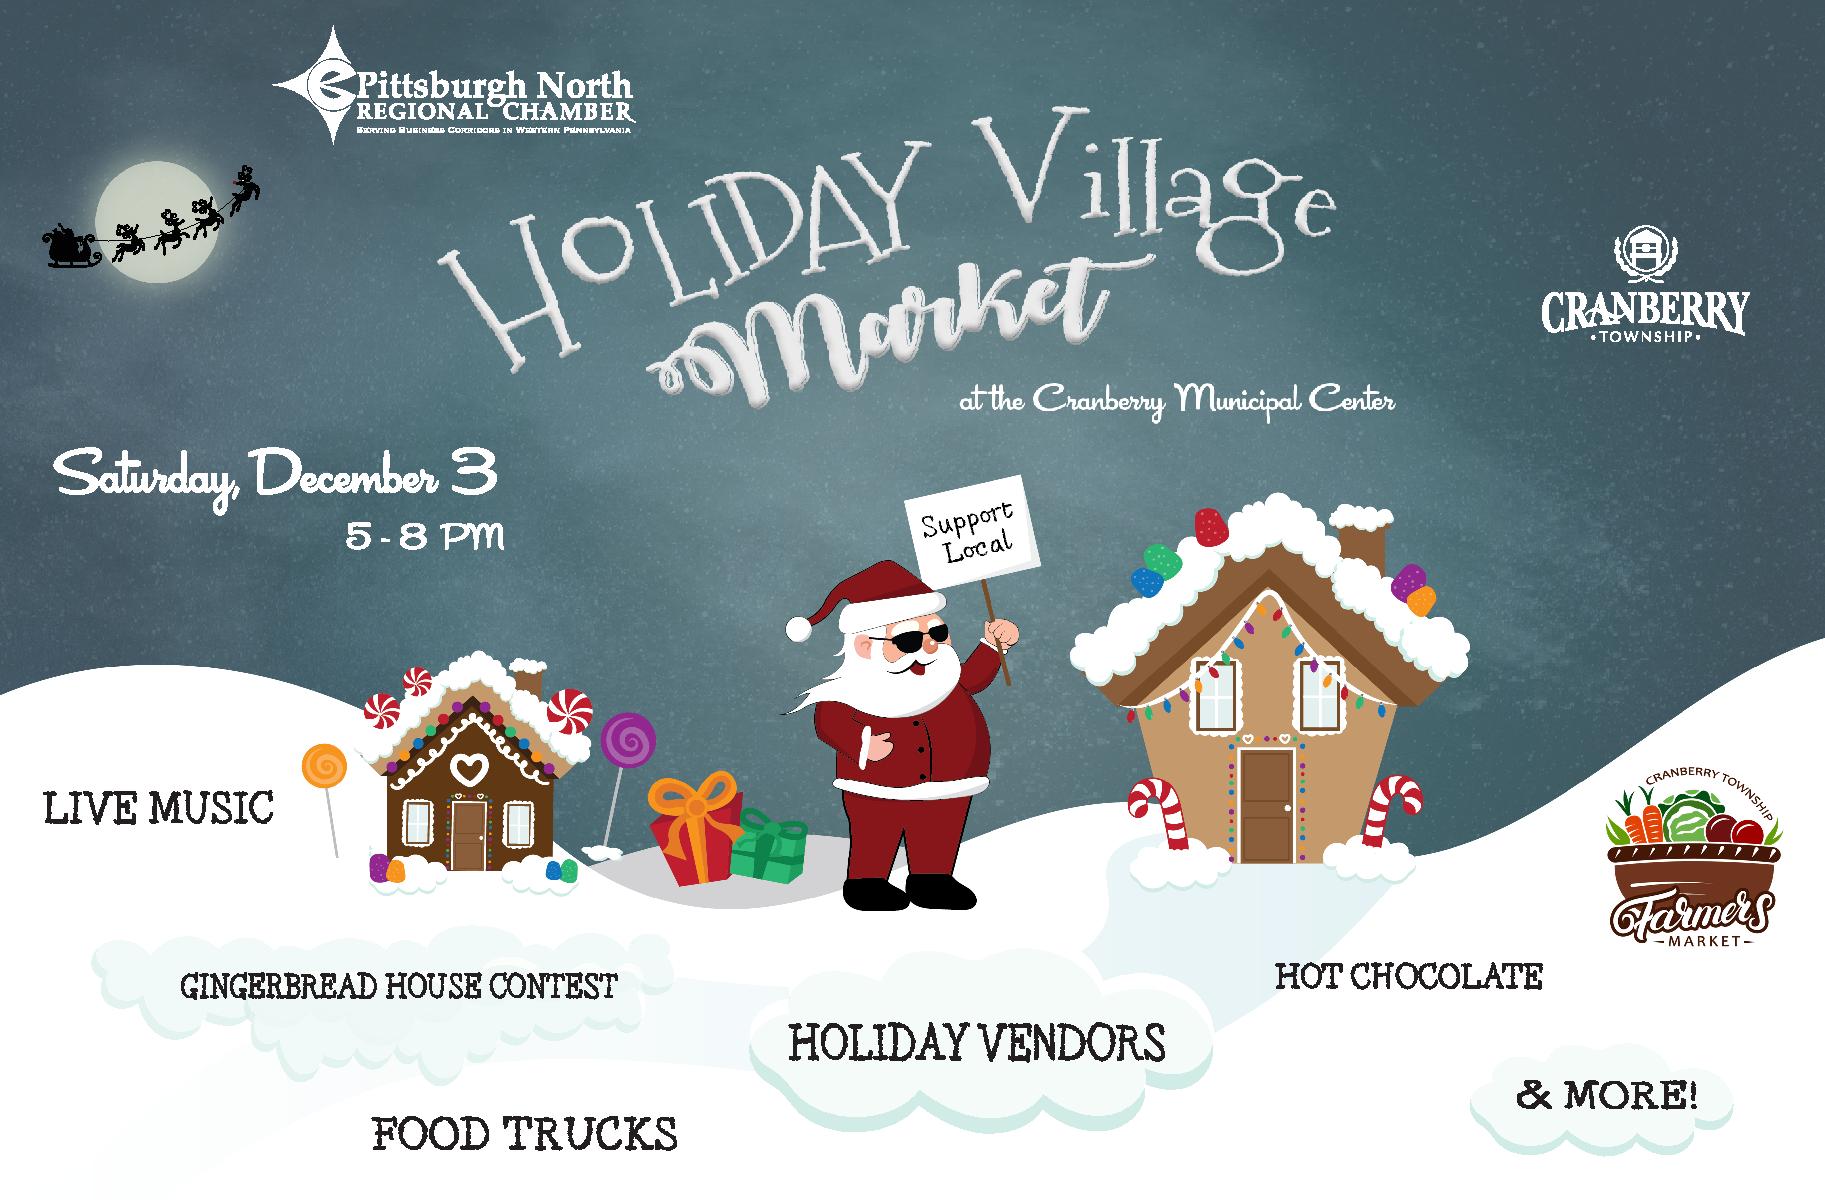 Flyer for the Holiday Village Market at the Cranberry Township Municipal Center